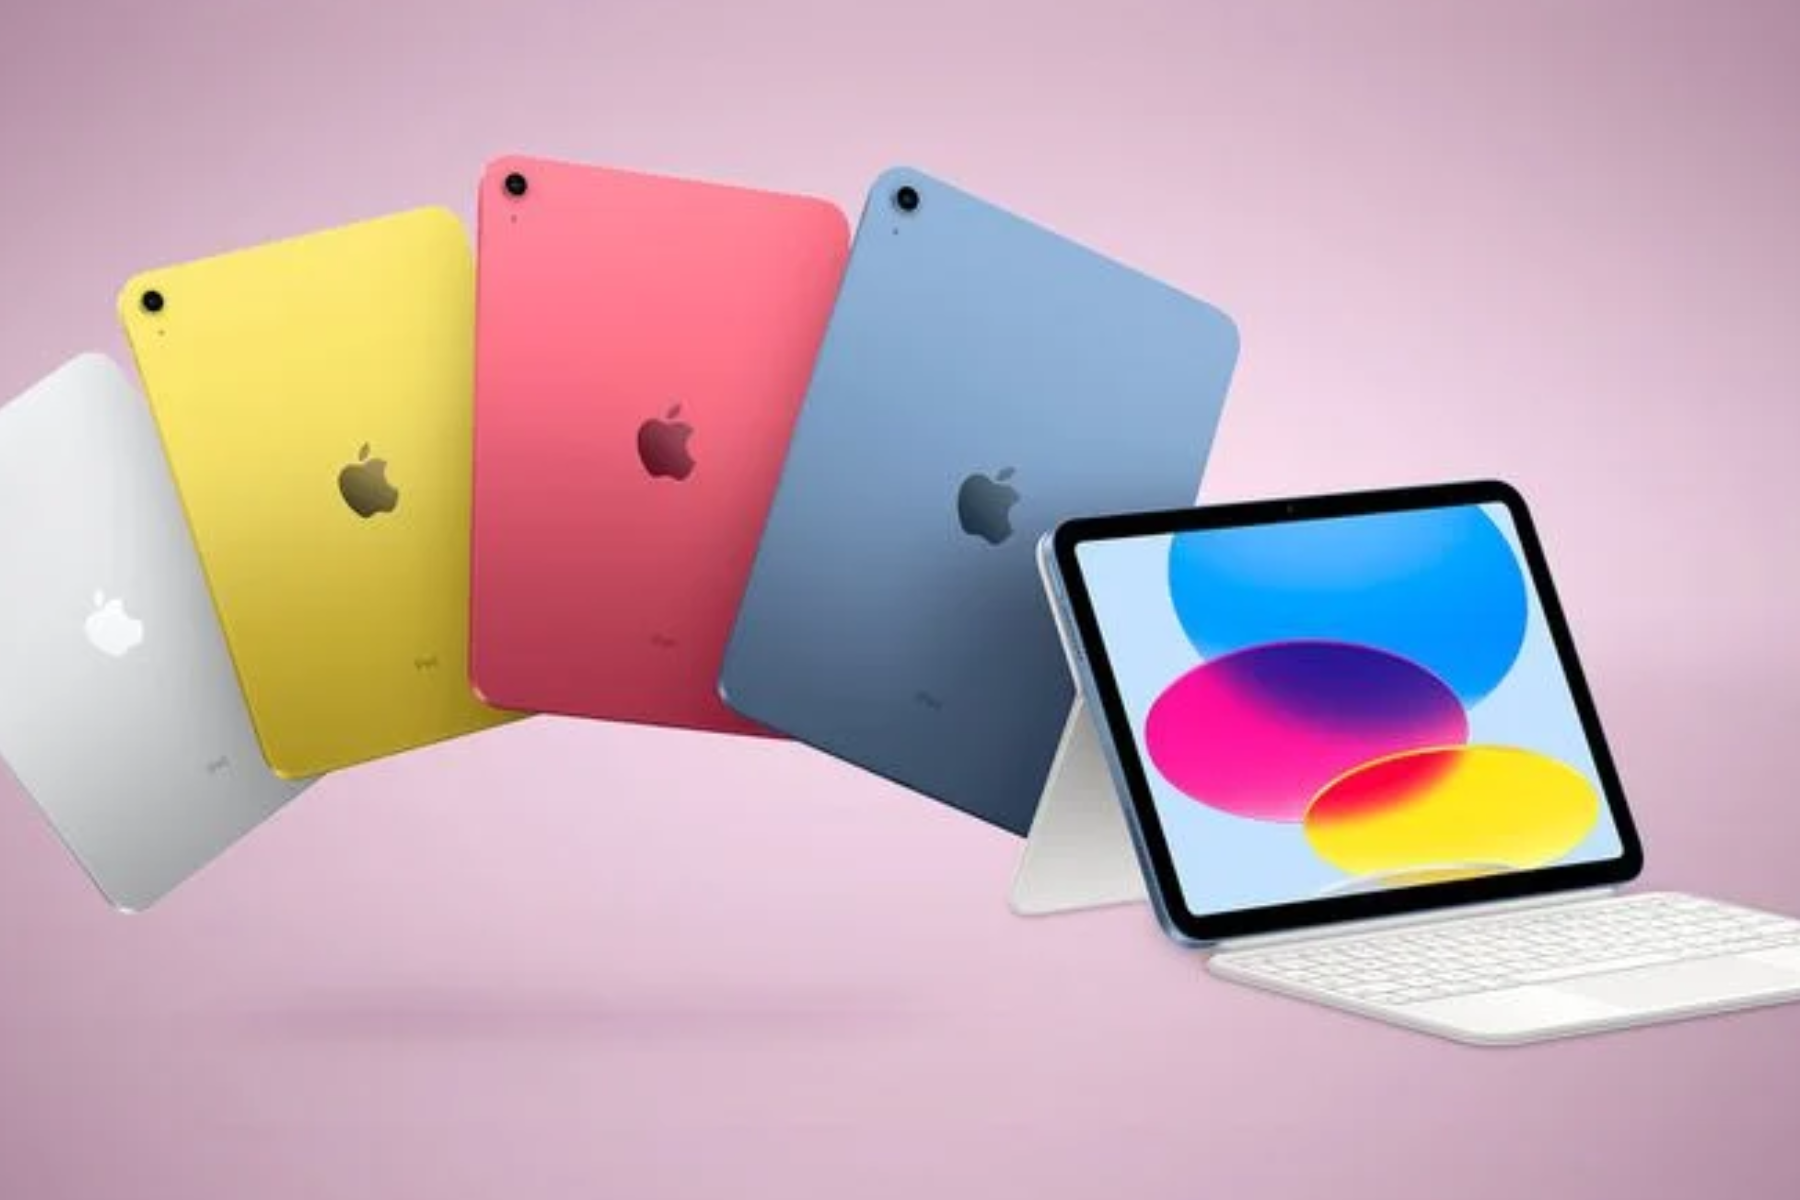 Five iPad models with different colors